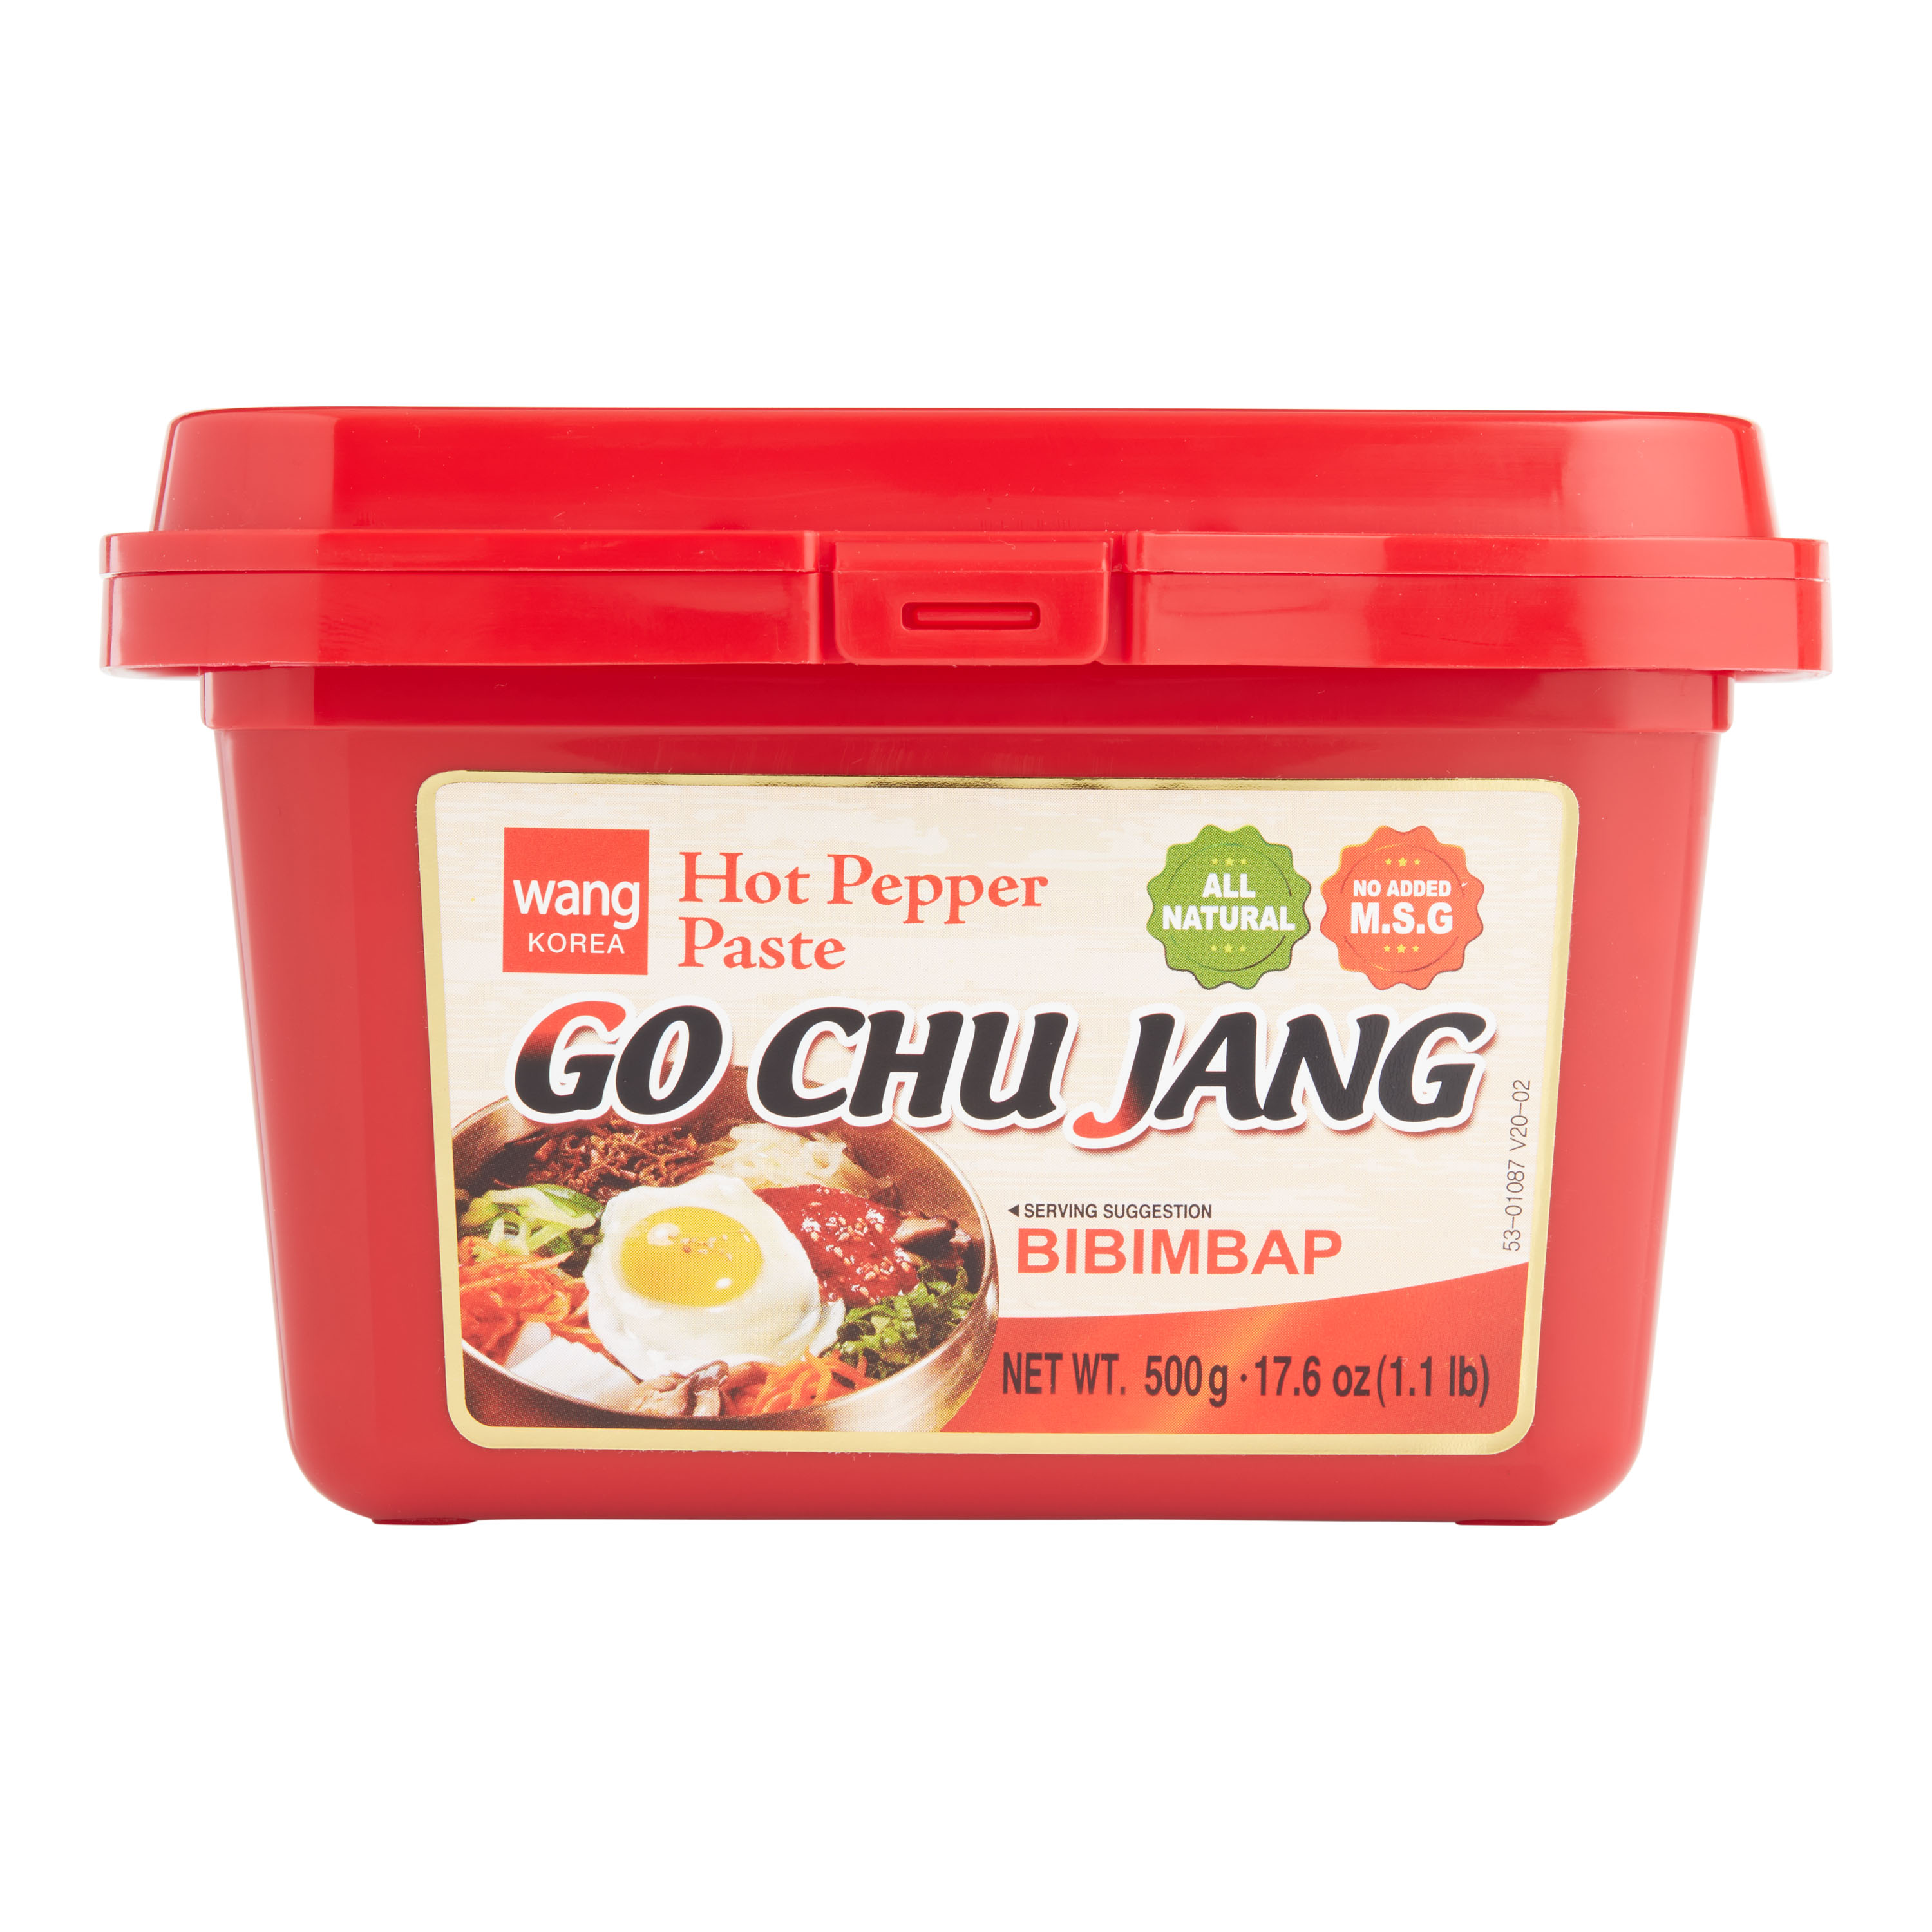 Why You Should Put Sweet and Spicy Korean Gochujang on Everything - Brit +  Co